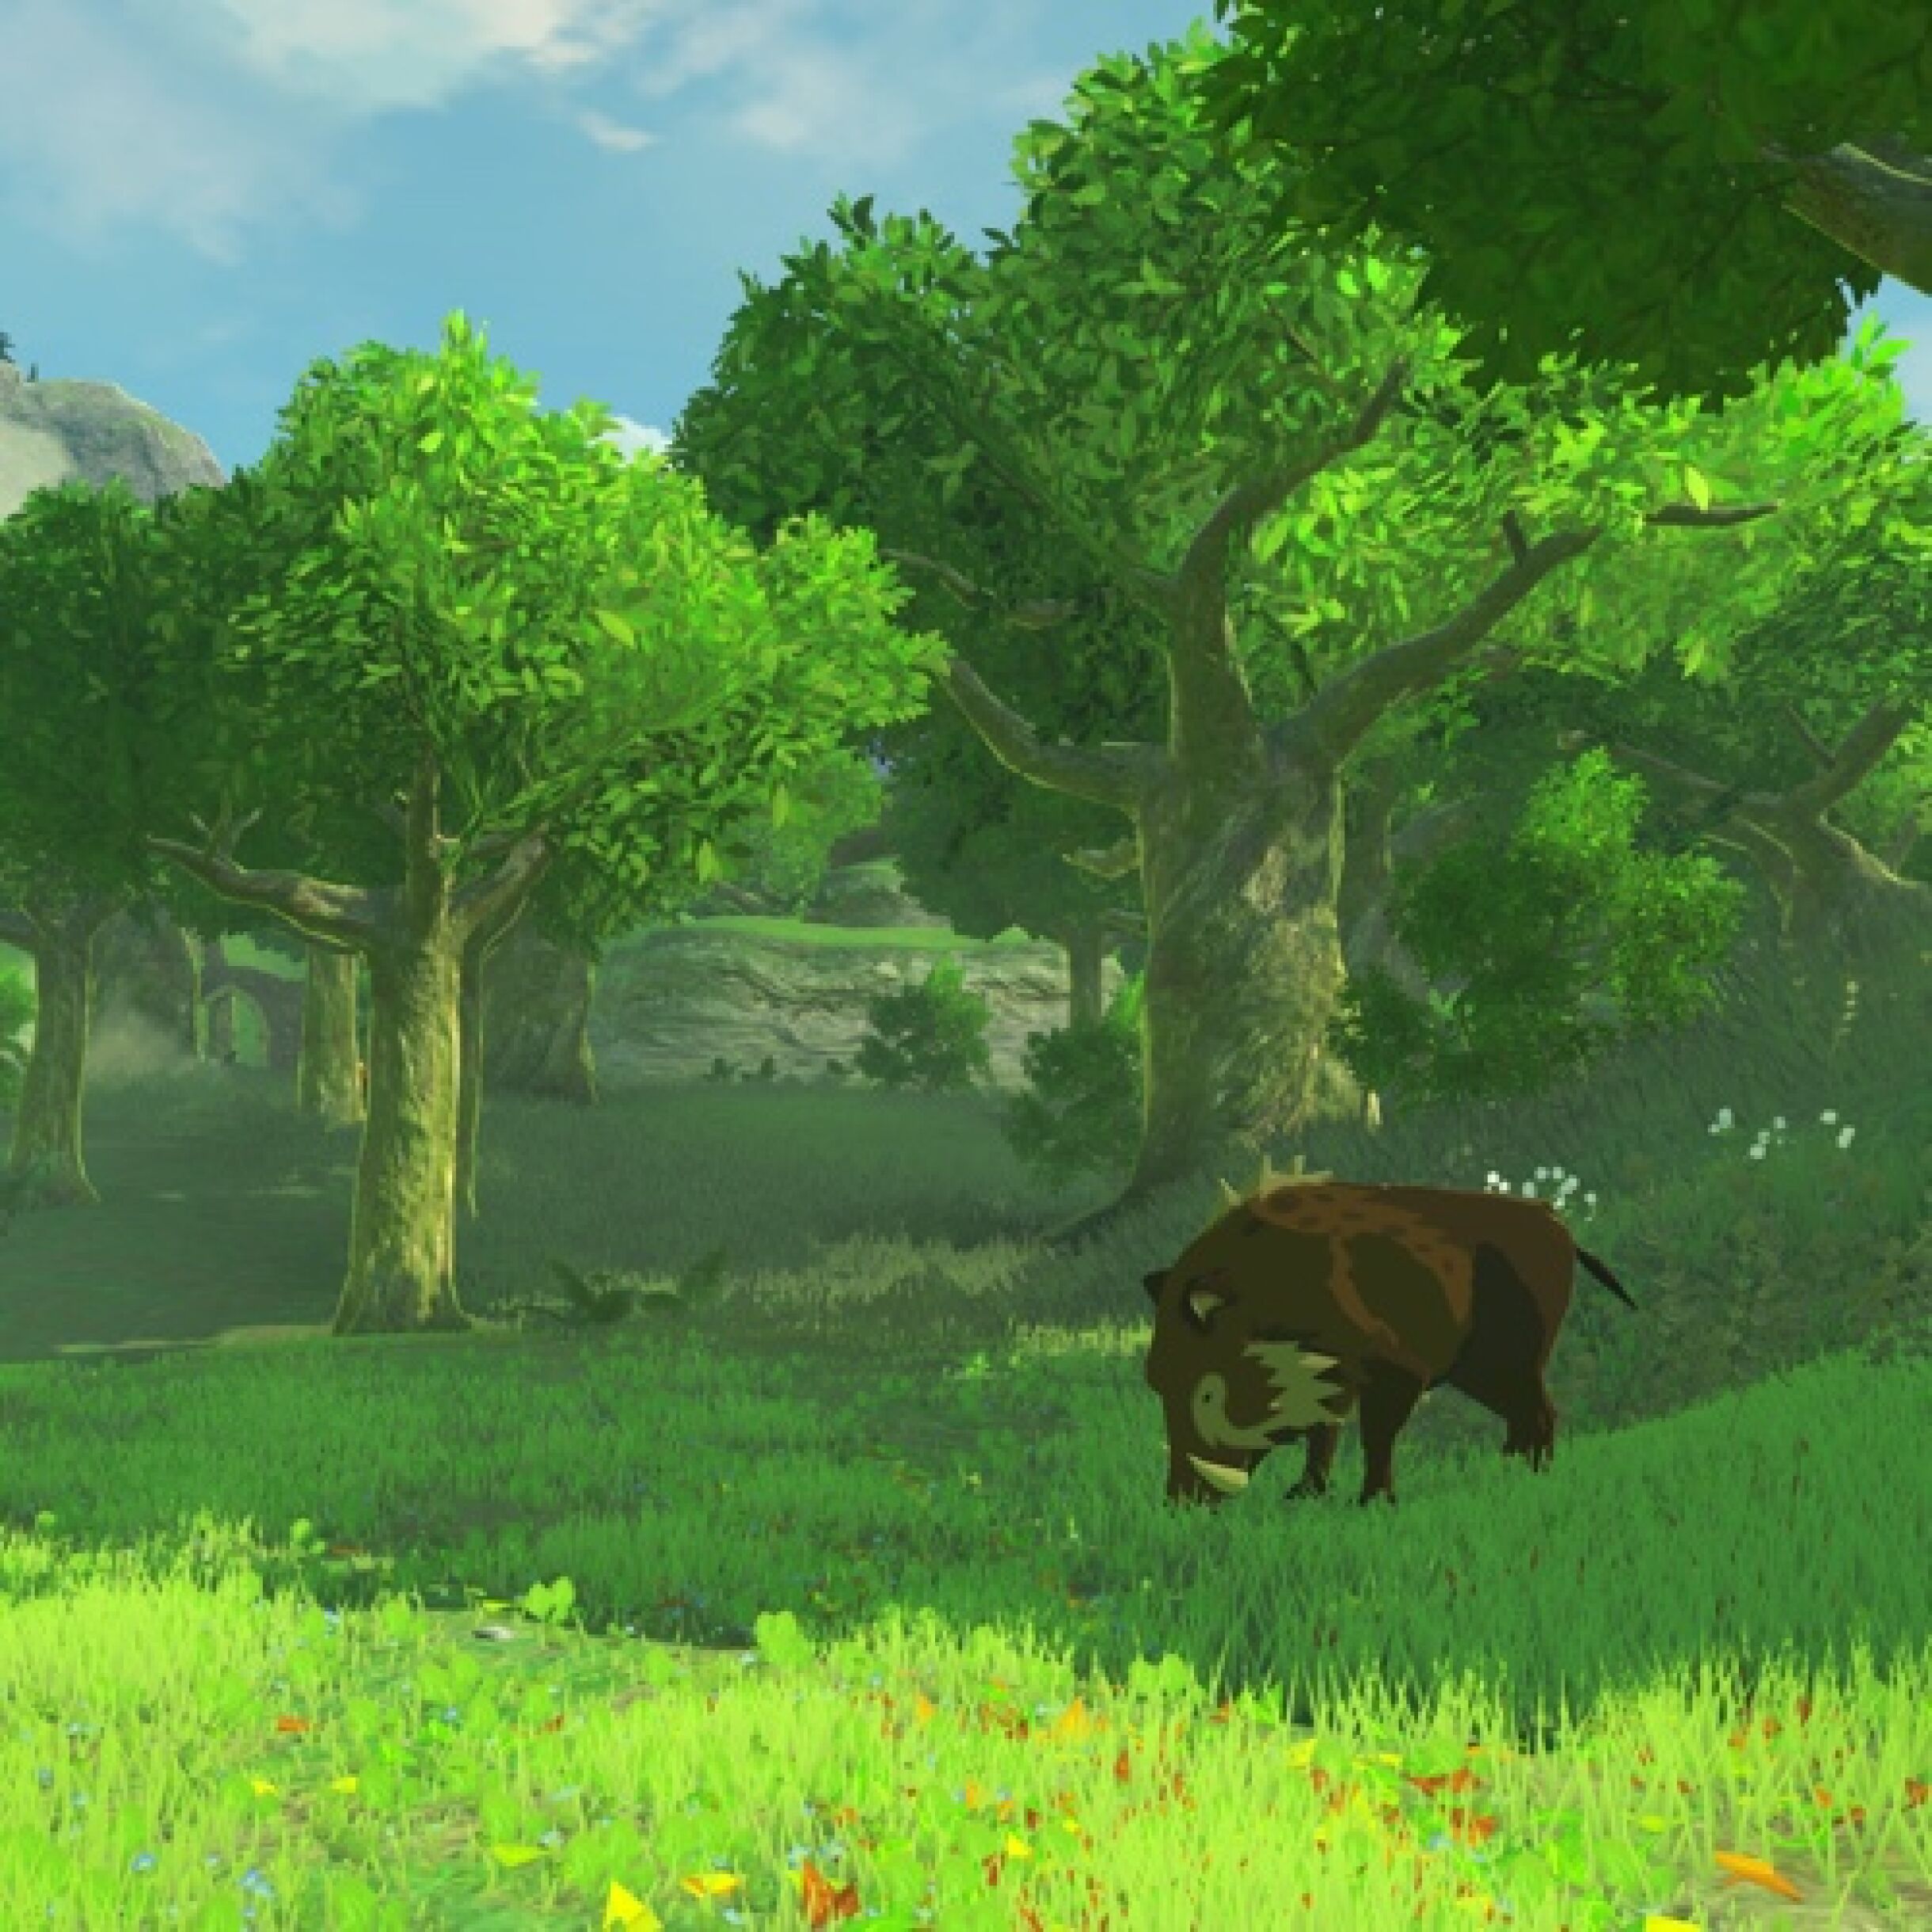 The Legend of Zelda: Breath of the Wild really struggles on the